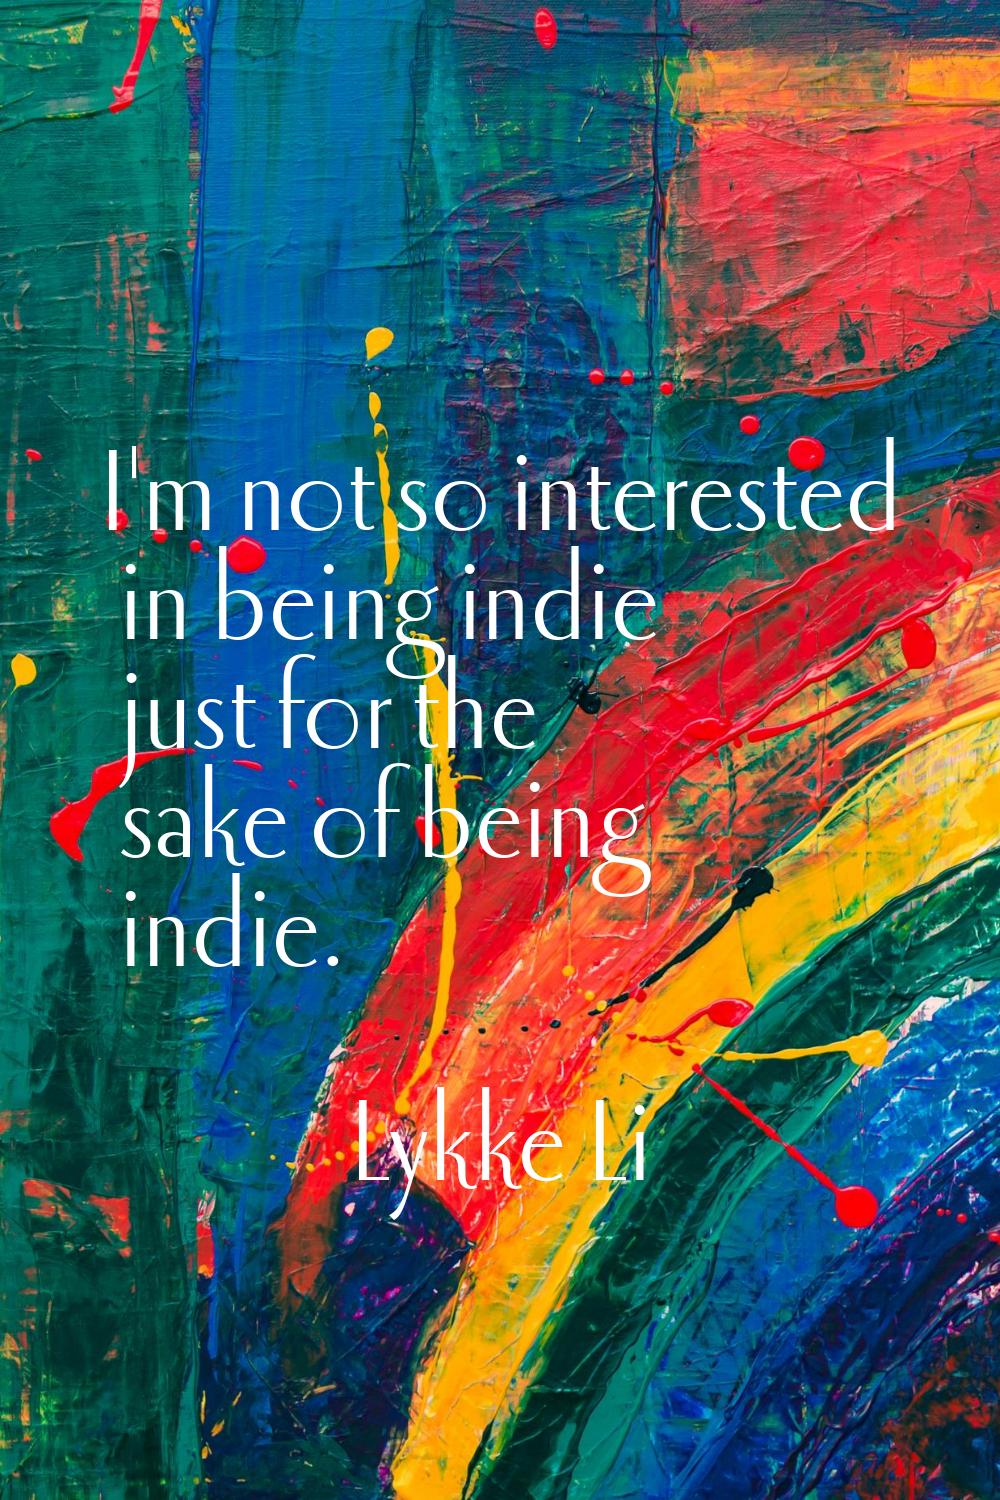 I'm not so interested in being indie just for the sake of being indie.